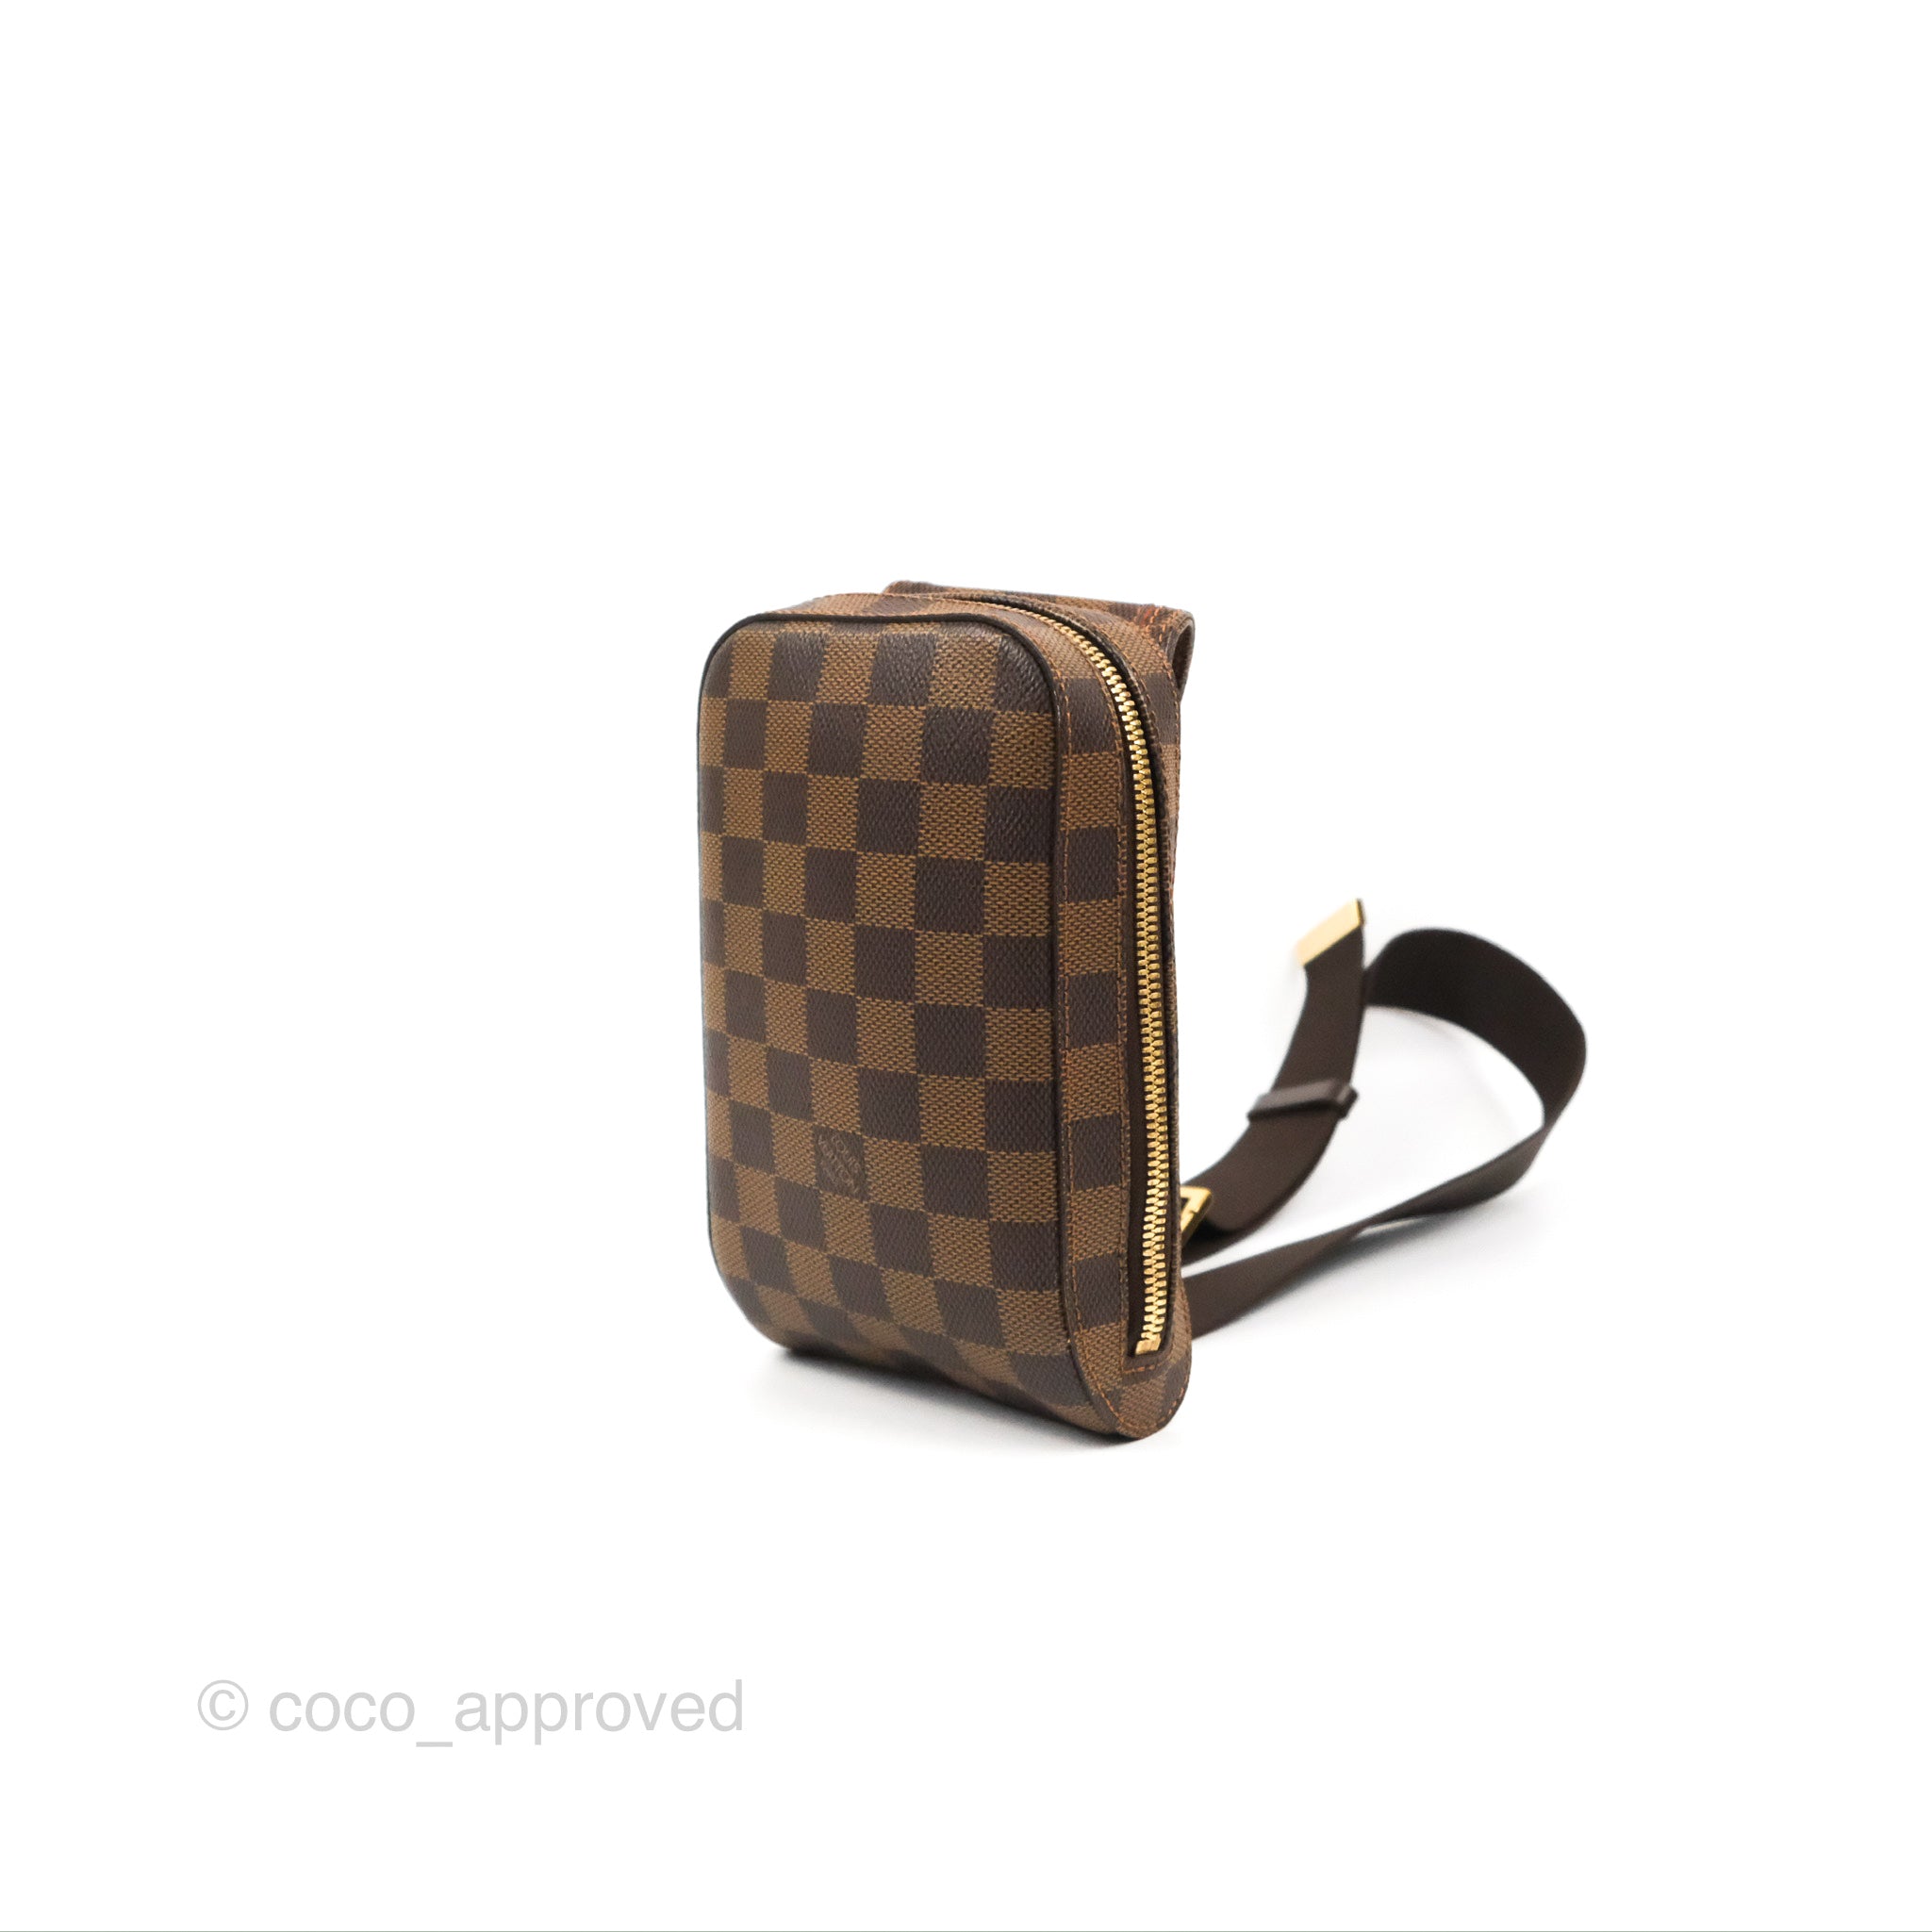 Sold at Auction: A GERONIMOS CROSSBODY BAG BY LOUIS VUITTON